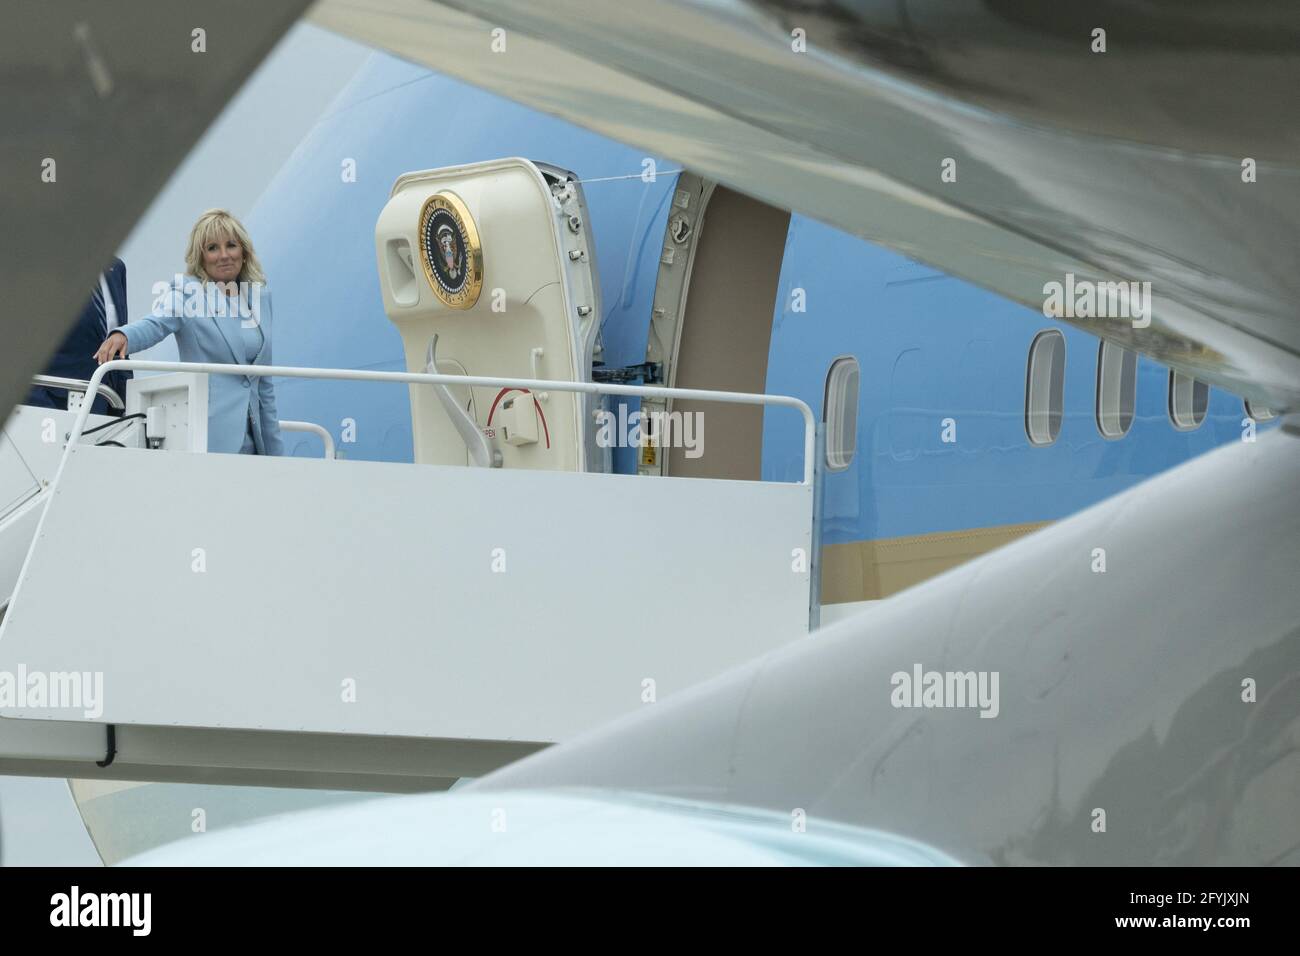 United States President Joe Biden and first lady Dr. Jill Biden board Air Force One at Joint Base Andrews, to make remarks at Joint Base Langley-Eustis in Virginia, Friday, May 28, 2021. Credit: Chris Kleponis / Pool via CNP Stock Photo